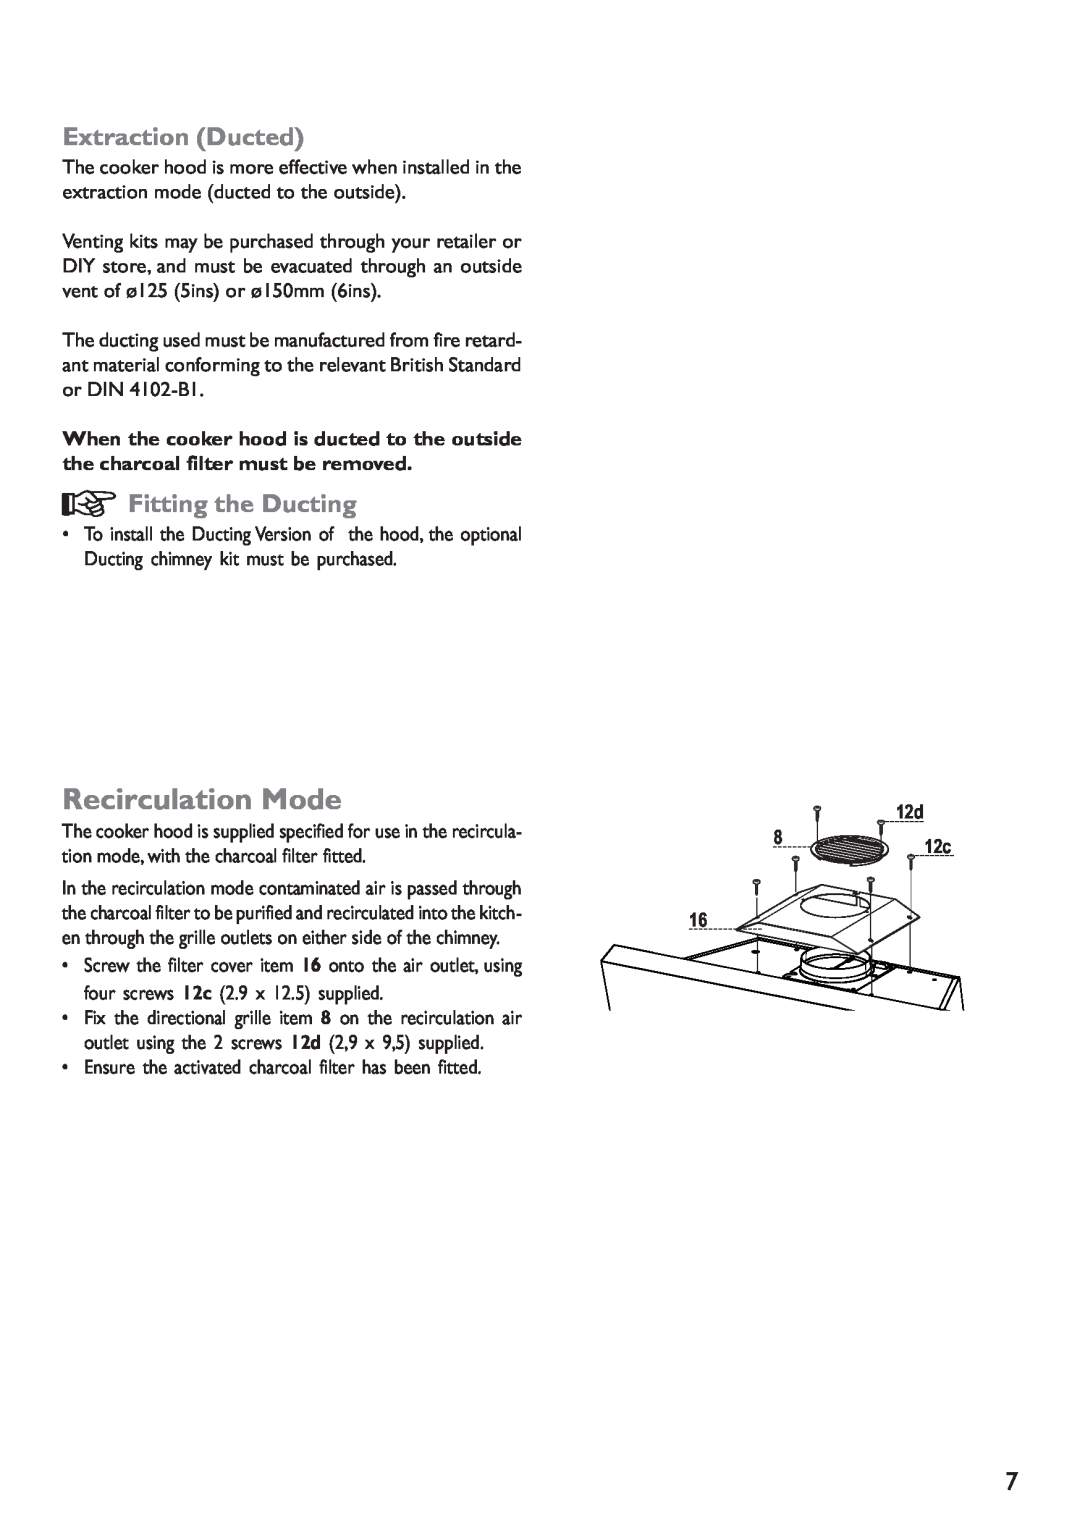 John Lewis JLBIHD908 instruction manual Recirculation Mode, Extraction Ducted, Fitting the Ducting 